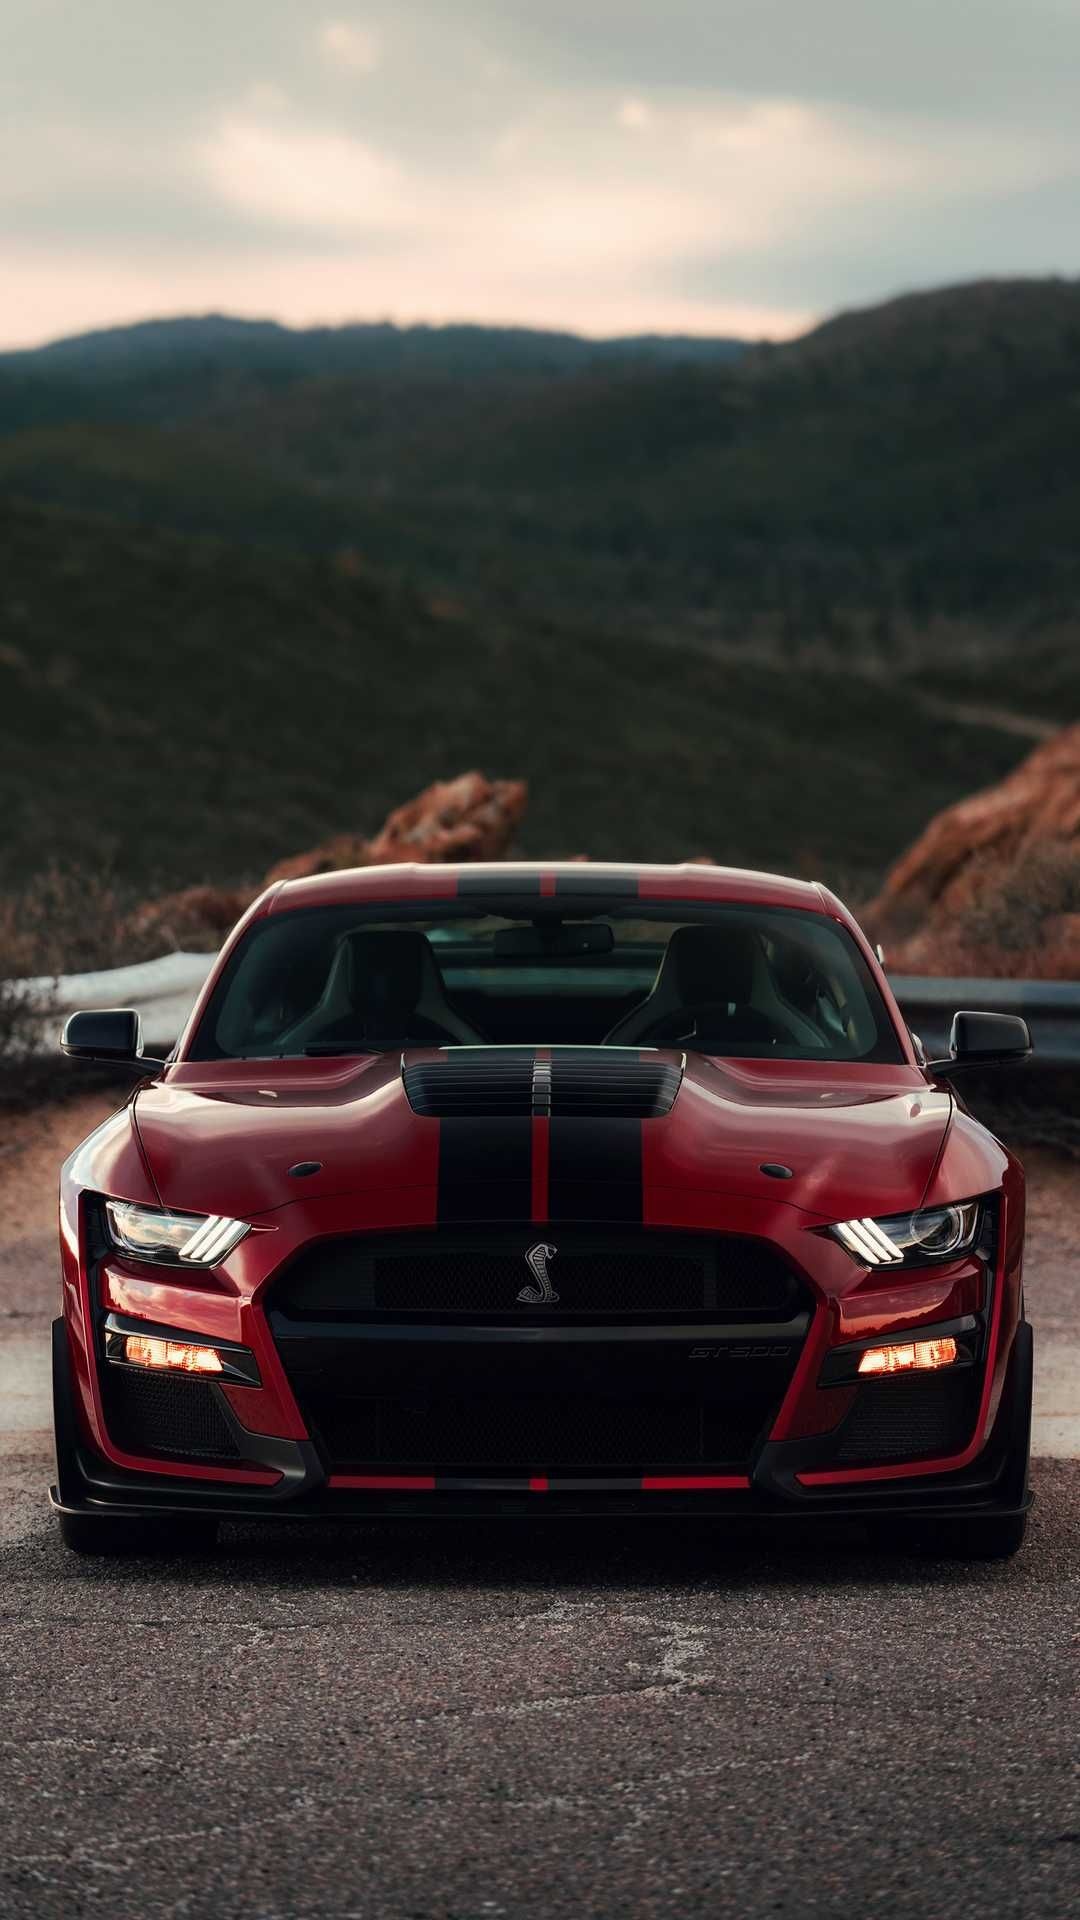 GT500 power, Ford Mustang Shelby GT500, Ford Mustang wallpaper, Ford Mustang GT500 beauty, 1080x1920 Full HD Handy